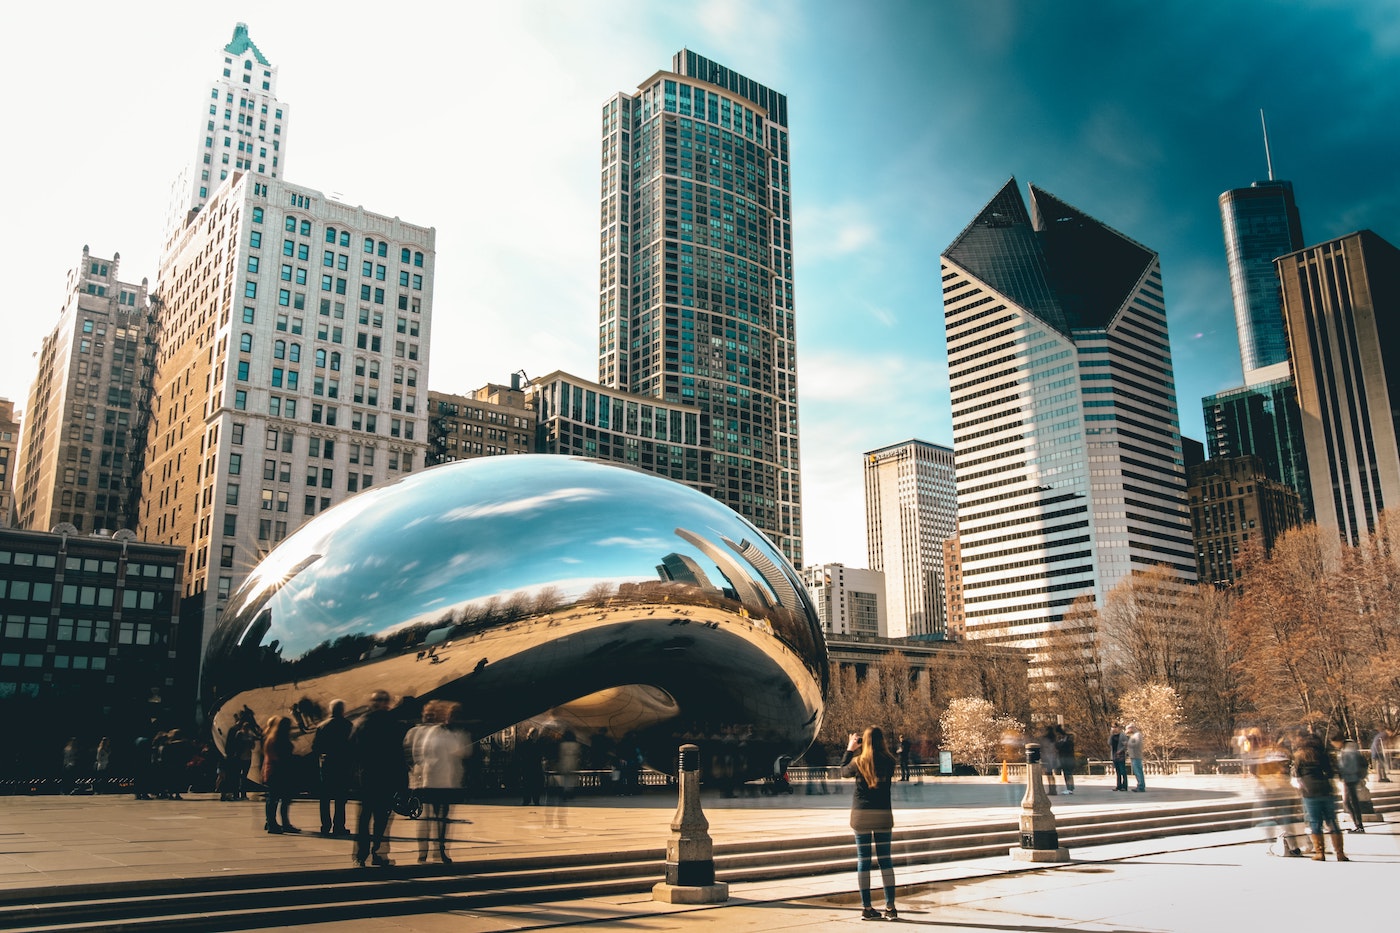 Chicago Travel Guide | What to See, Eat and Drink